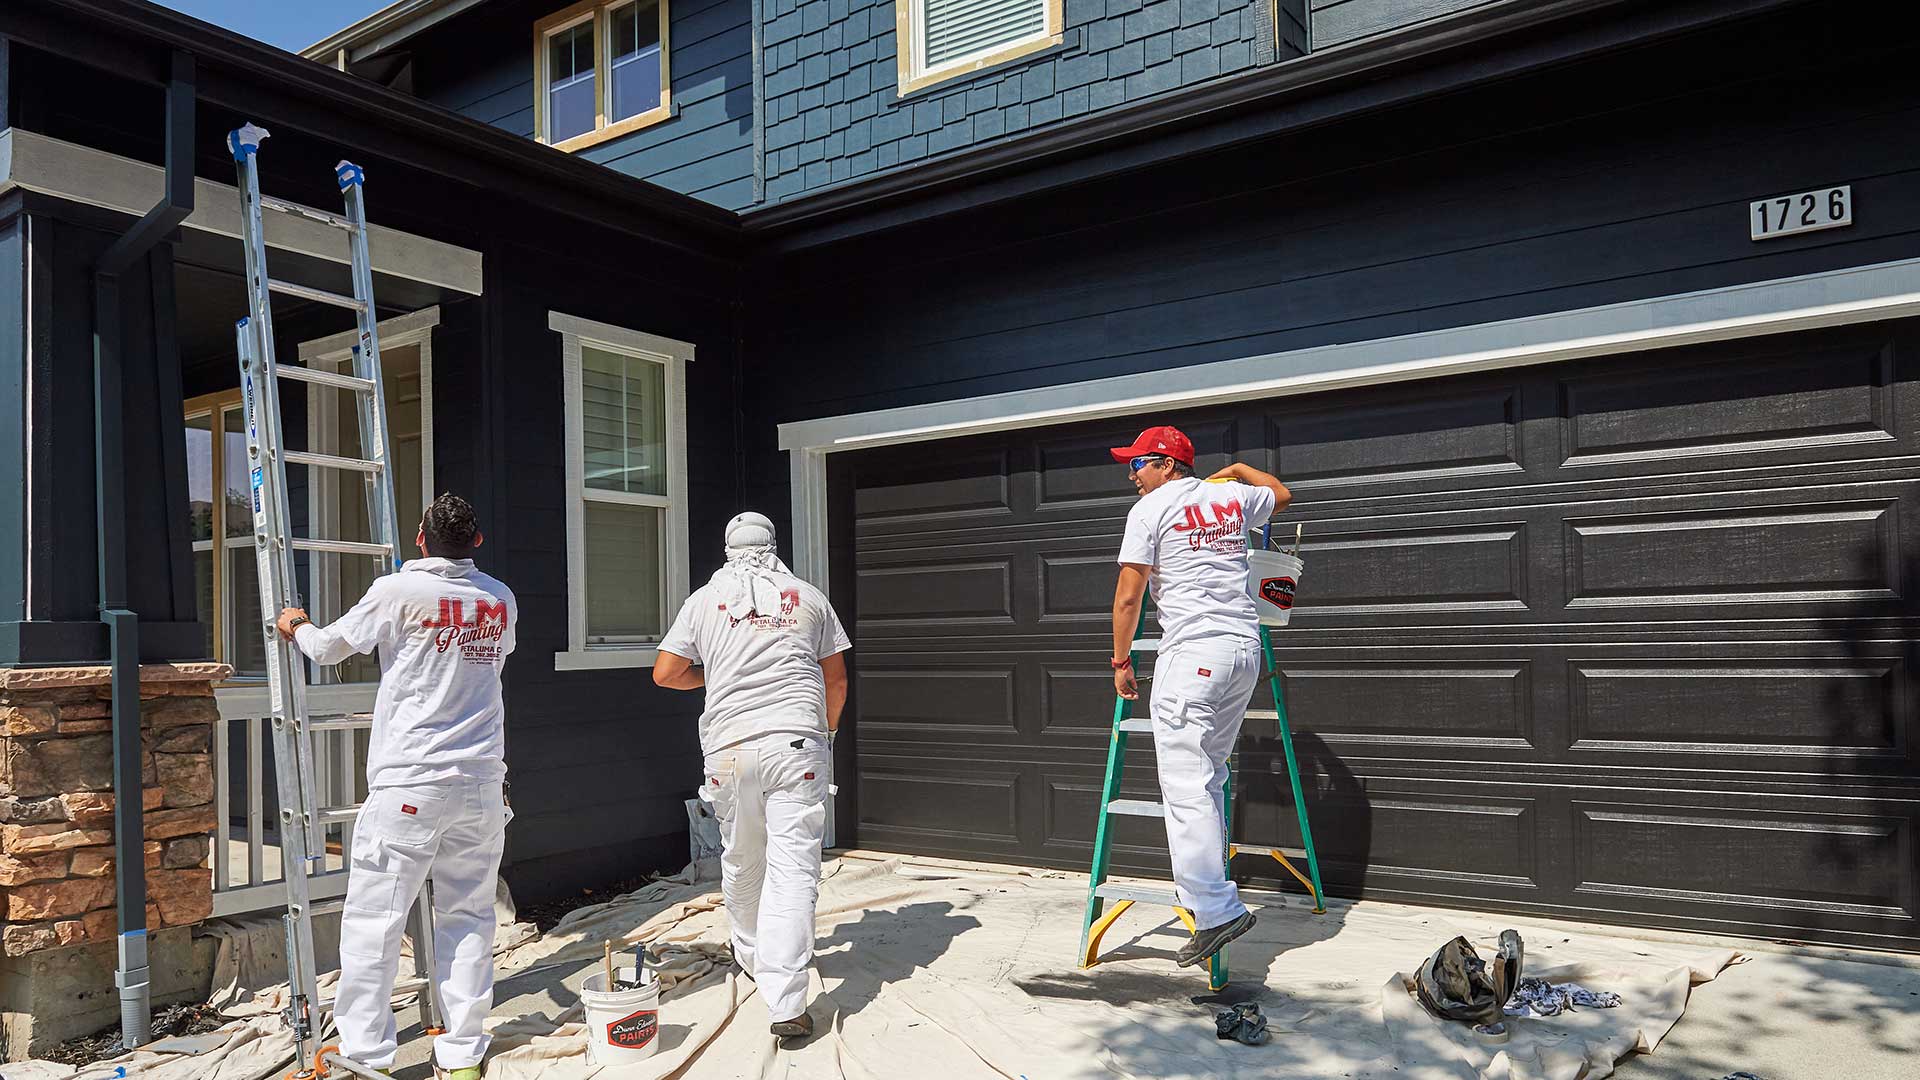 Residential Exterior Painting Services | JLM Painting, Inc.